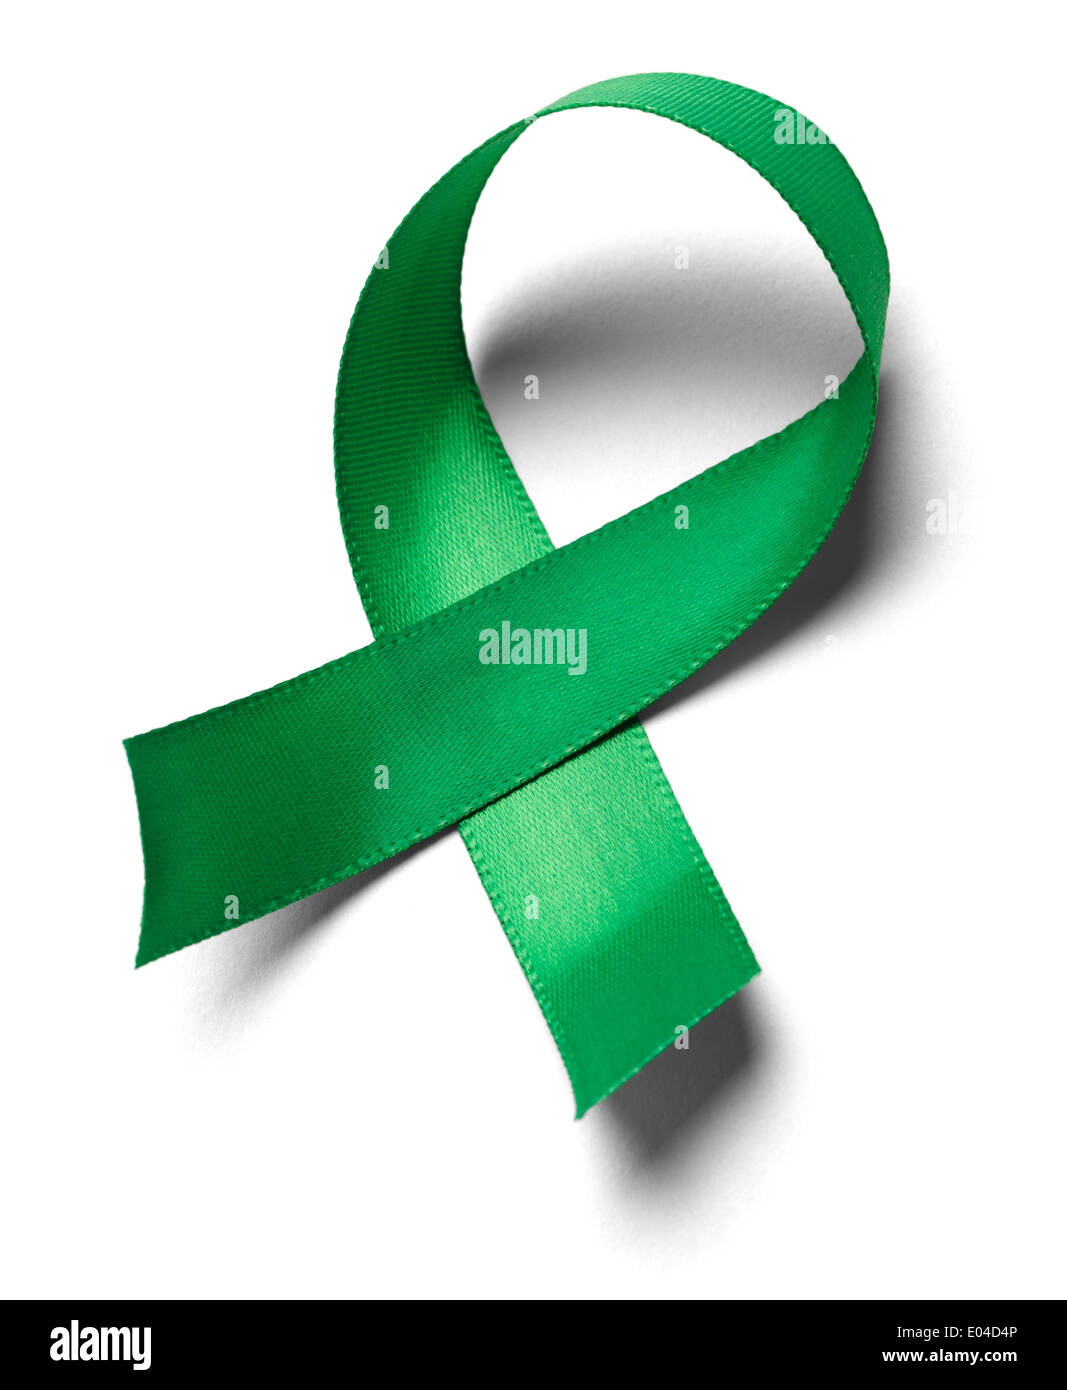 Green awareness ribbon isolated on a white background. Stock Photo